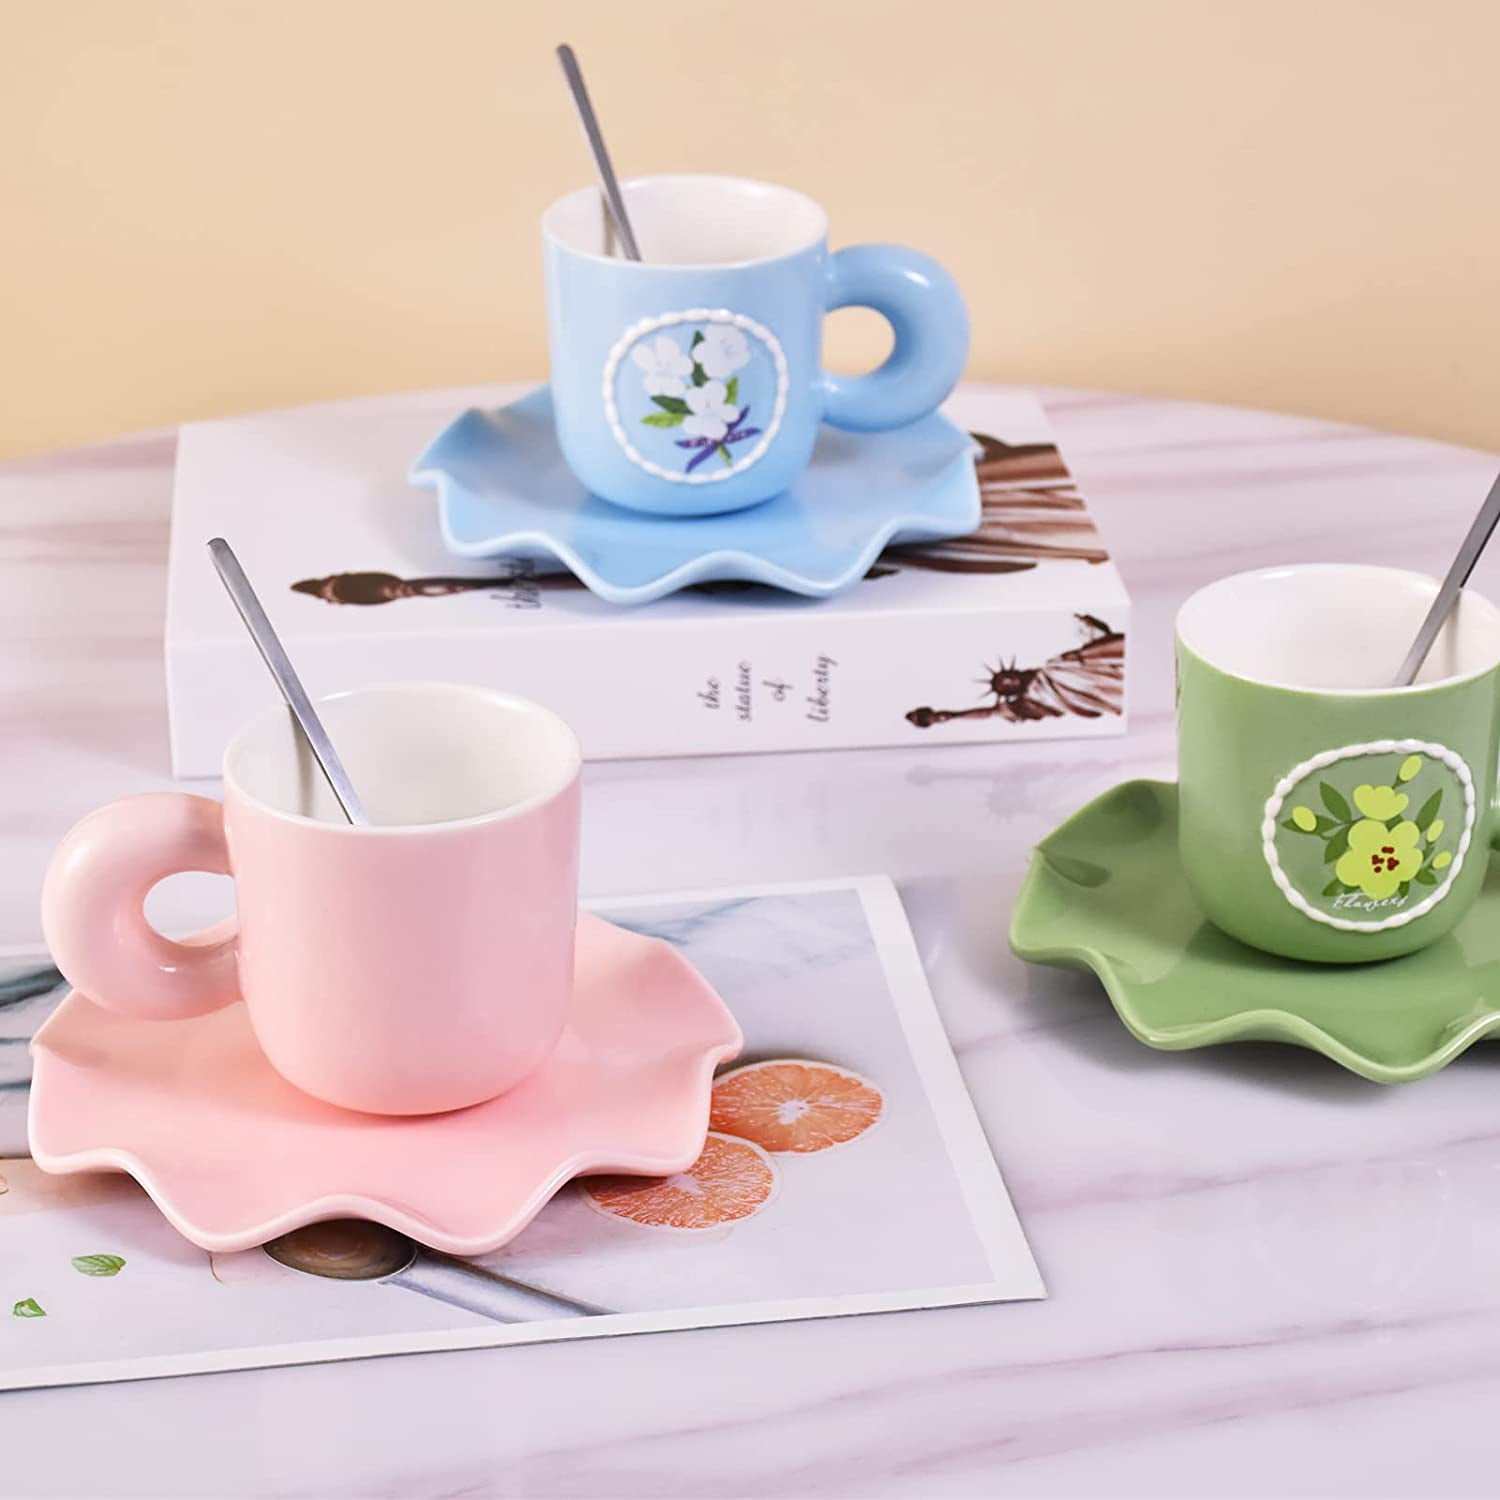 OAVQHLG3B Ceramic Coffee Cups,Mirror Cup and Saucer,Girl Tea Cups And  Saucers Sets,Reusable Coffee Cup,Porcelain Coffee Mugs Set 